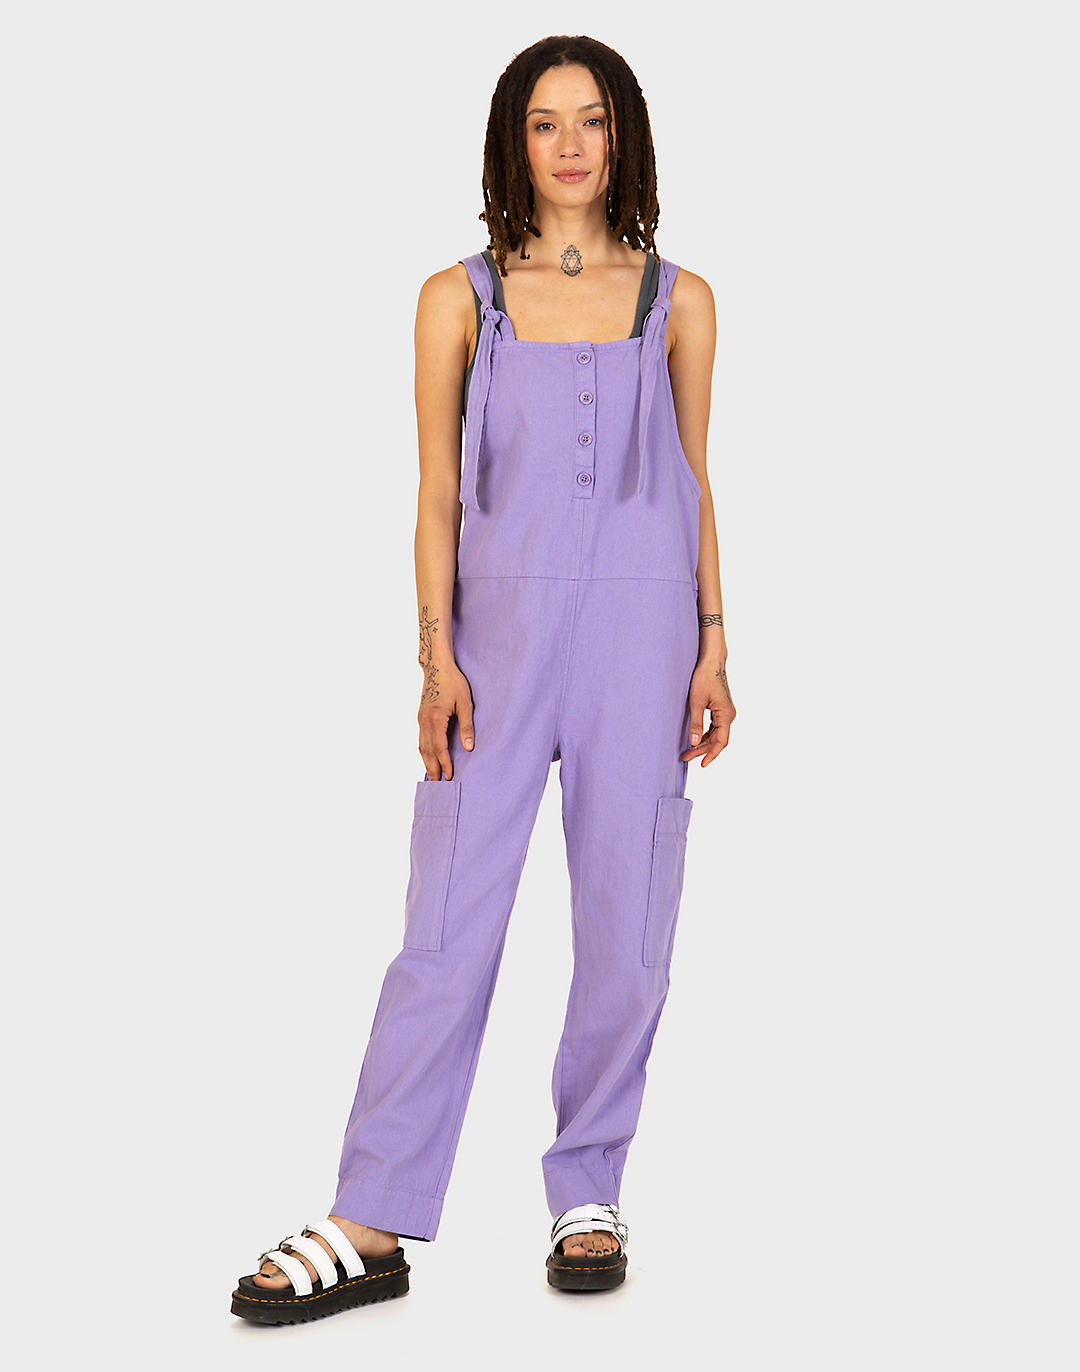 80s Jumpsuits and Overalls Back Beat Co. Hemp Canvas Overall $178.00 AT vintagedancer.com